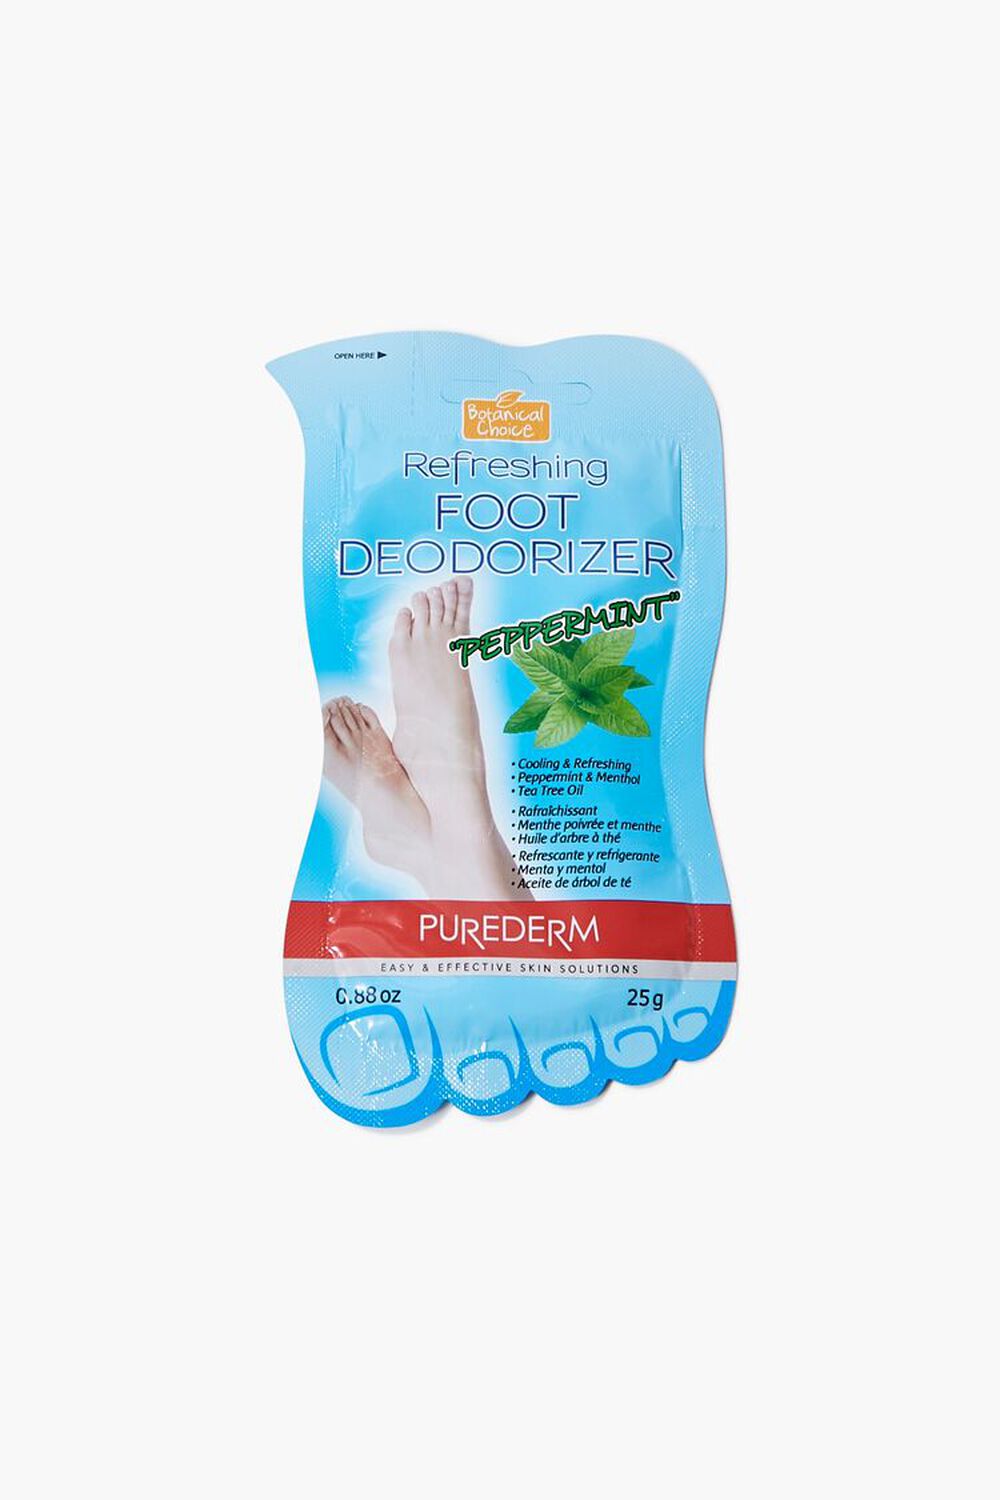 Refreshing Foot Deodorizer - Peppermint, image 1